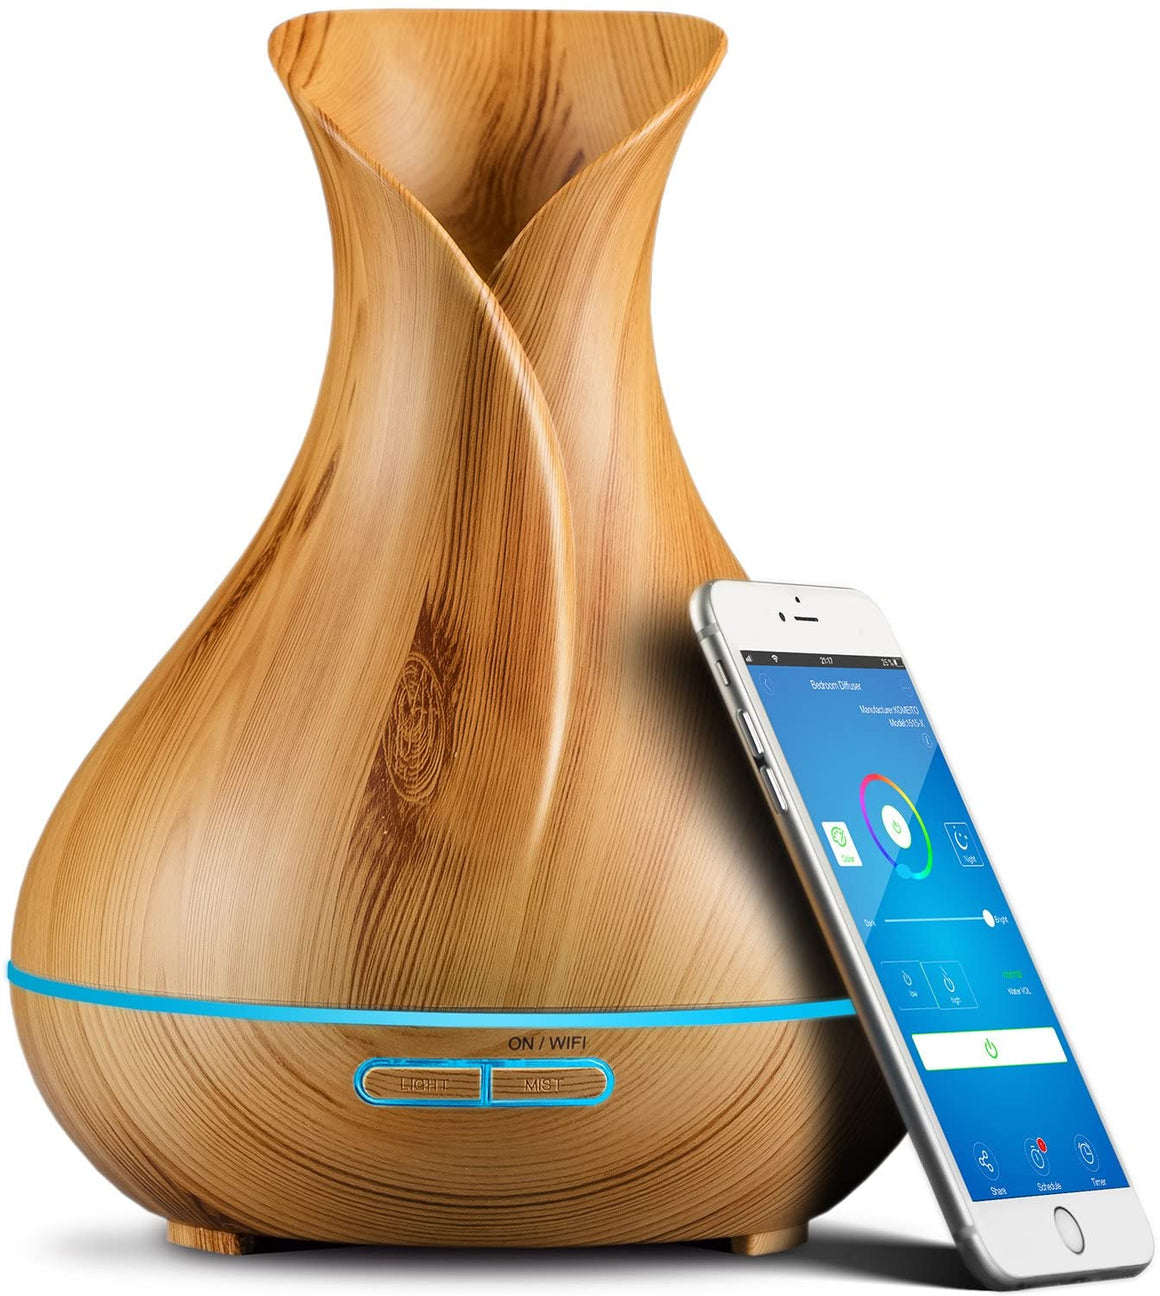 Wood Grain Diffuser with Bluetooth Technology